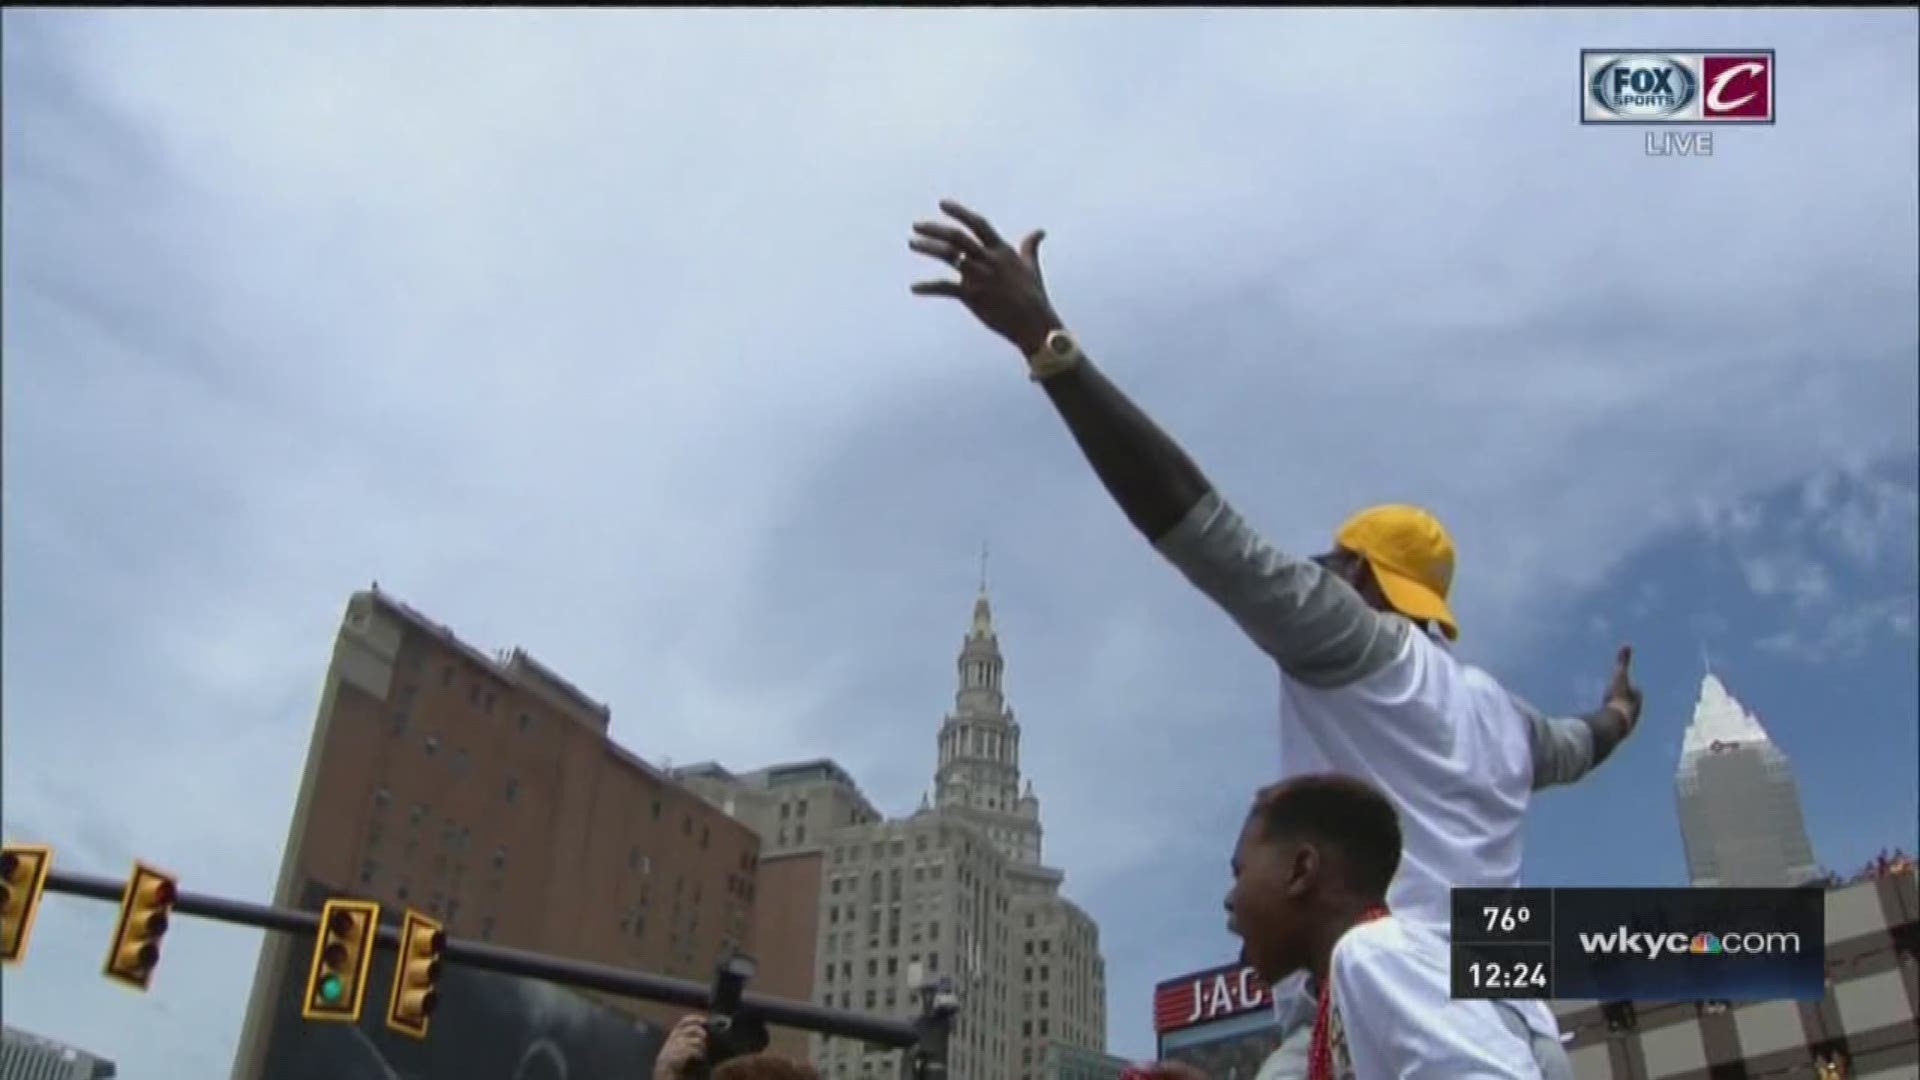 June 22, 2016: The crowd erupted when LeBron James made his first appearance in the Cleveland Cavaliers victory parade.